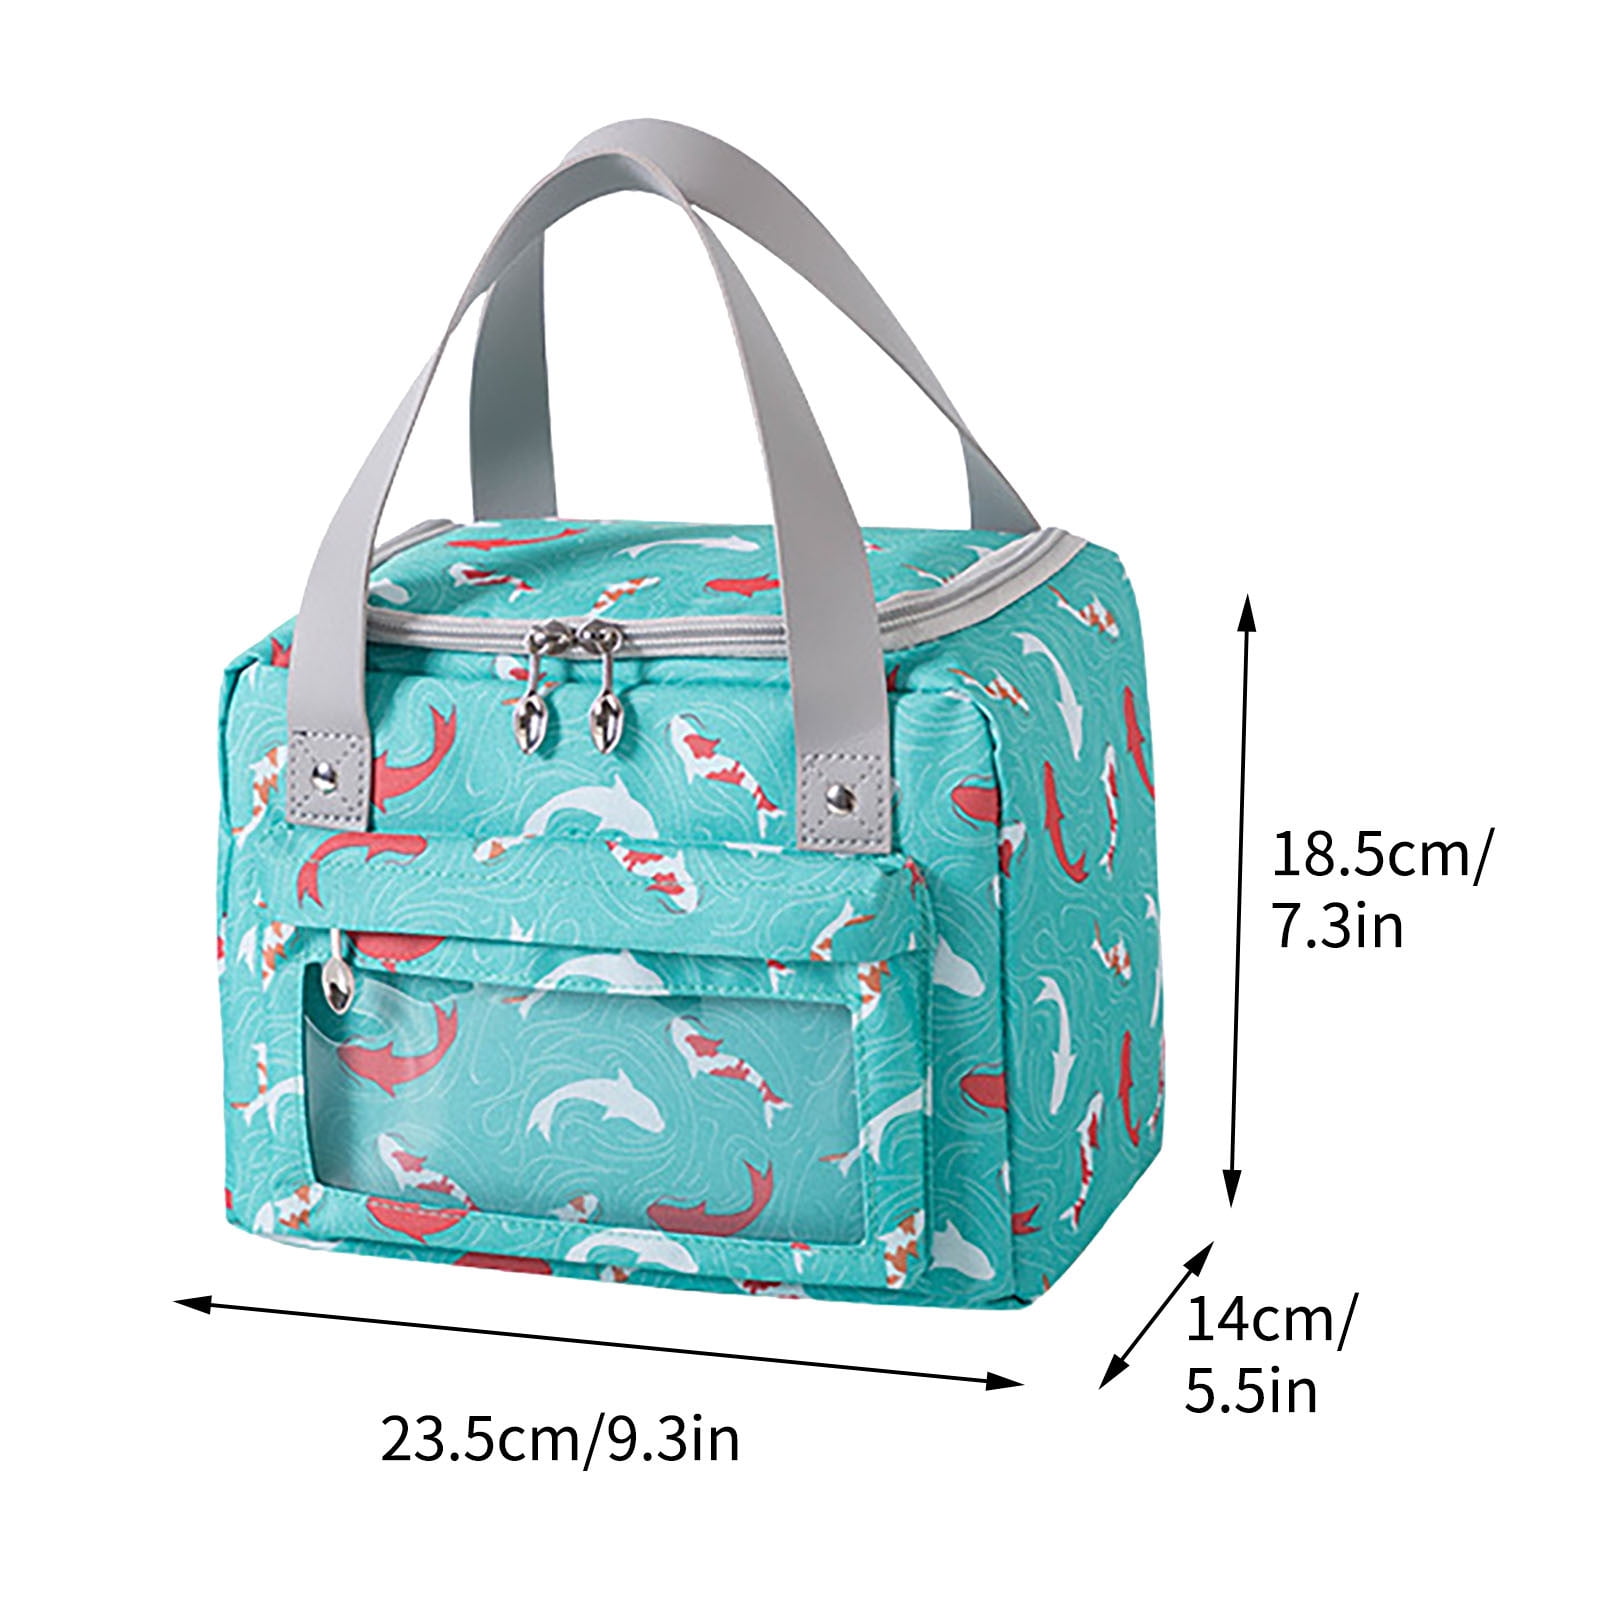 Qisiwole Insulated Lunch Bag for Women/Men, Reusable Leakproof Cooler Thermal Lunch Box Tote Bags Fit for Ice Pack, Adults College Fashion Lunch Bags